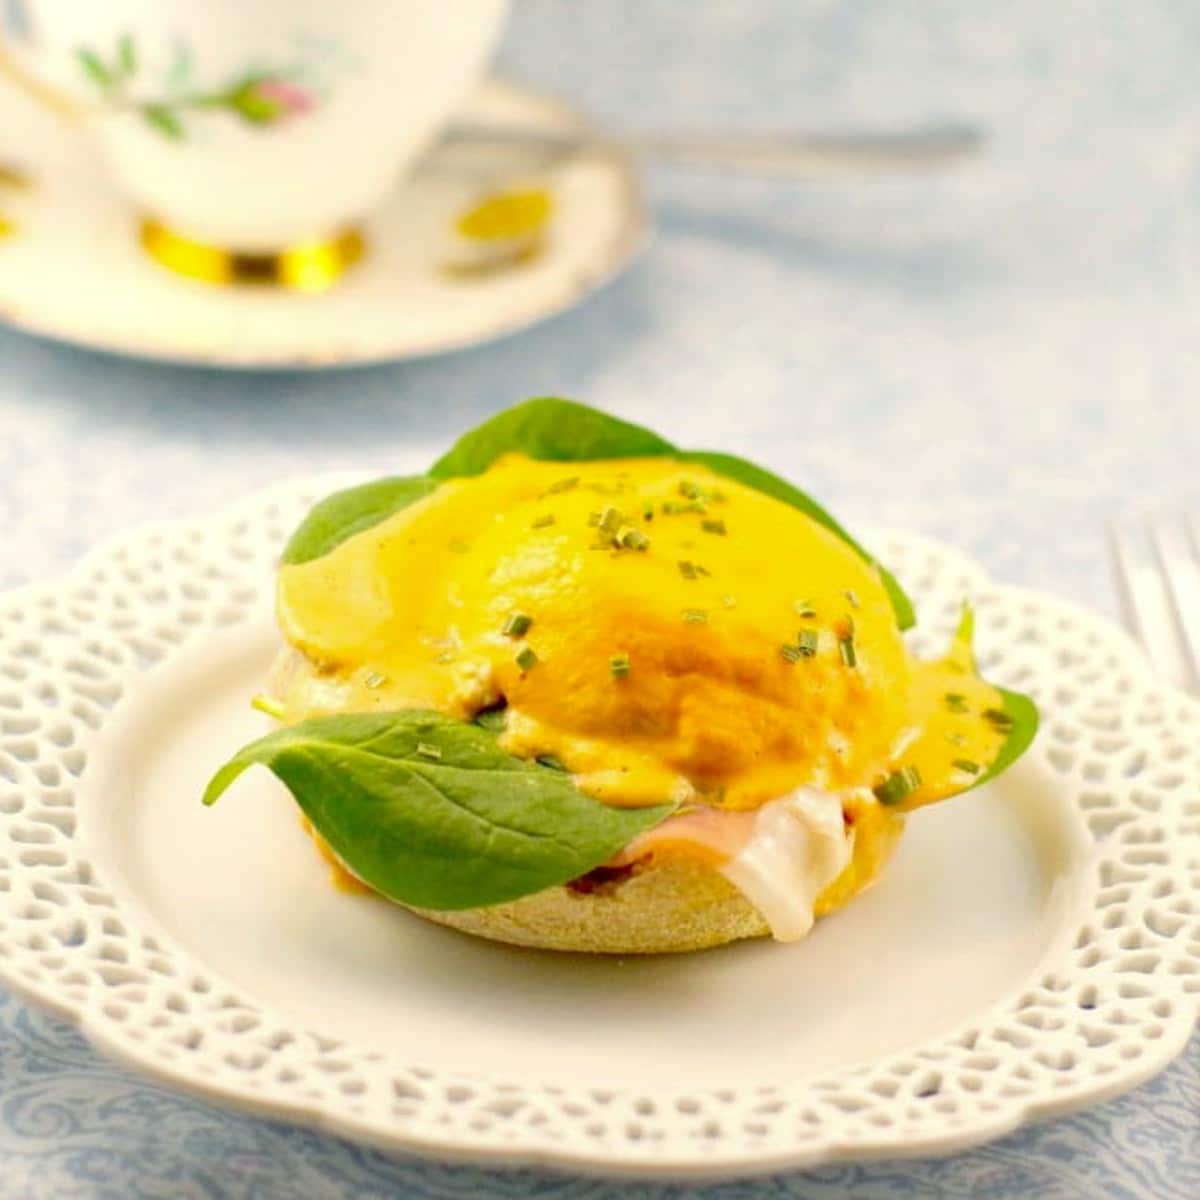 Master the Art of Making Hollandaise Sauce Without a Blender